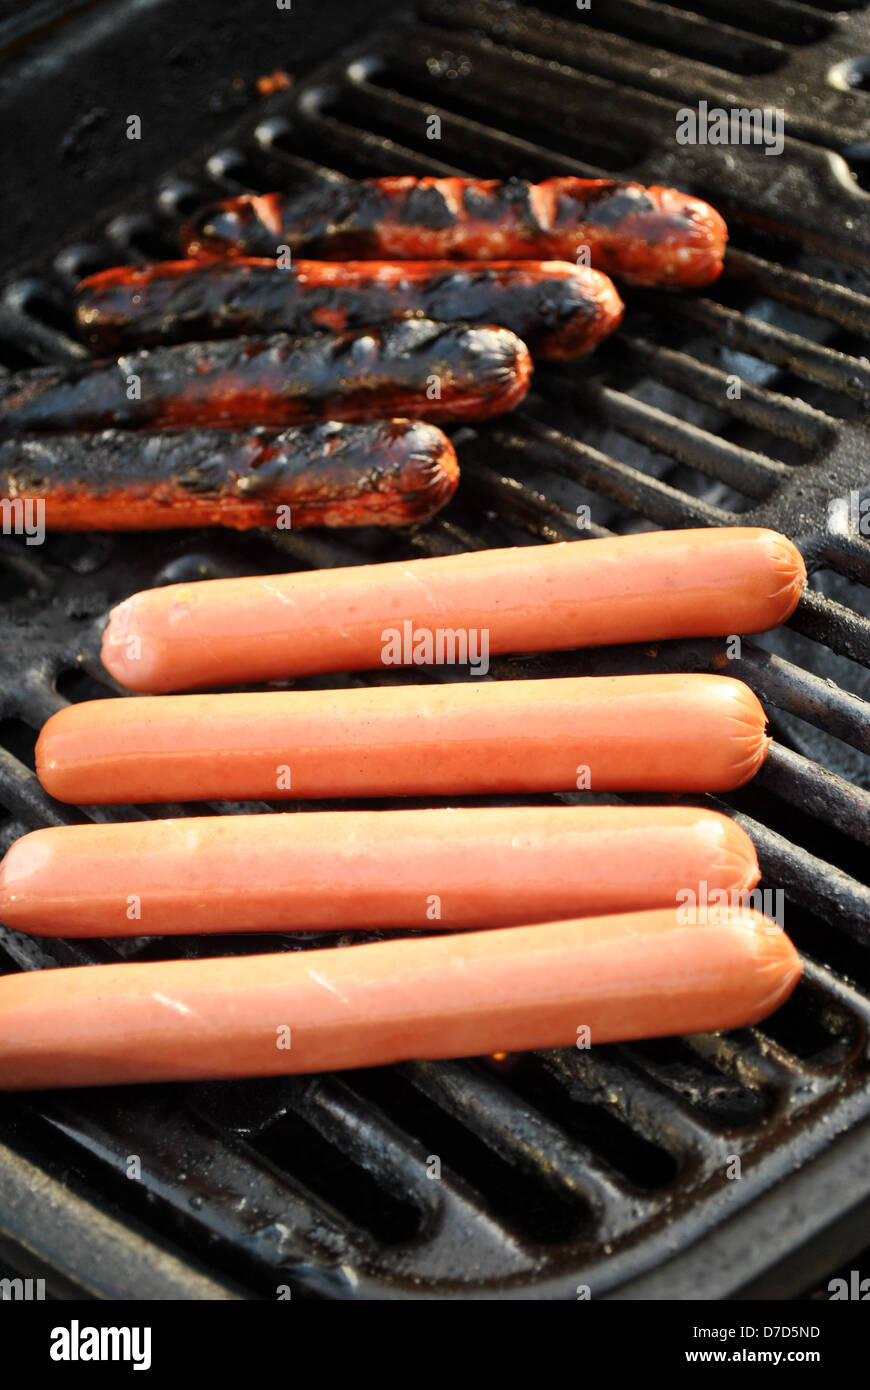 Cooked and Raw Hotdogs on a Picnic Grill Stock Photo